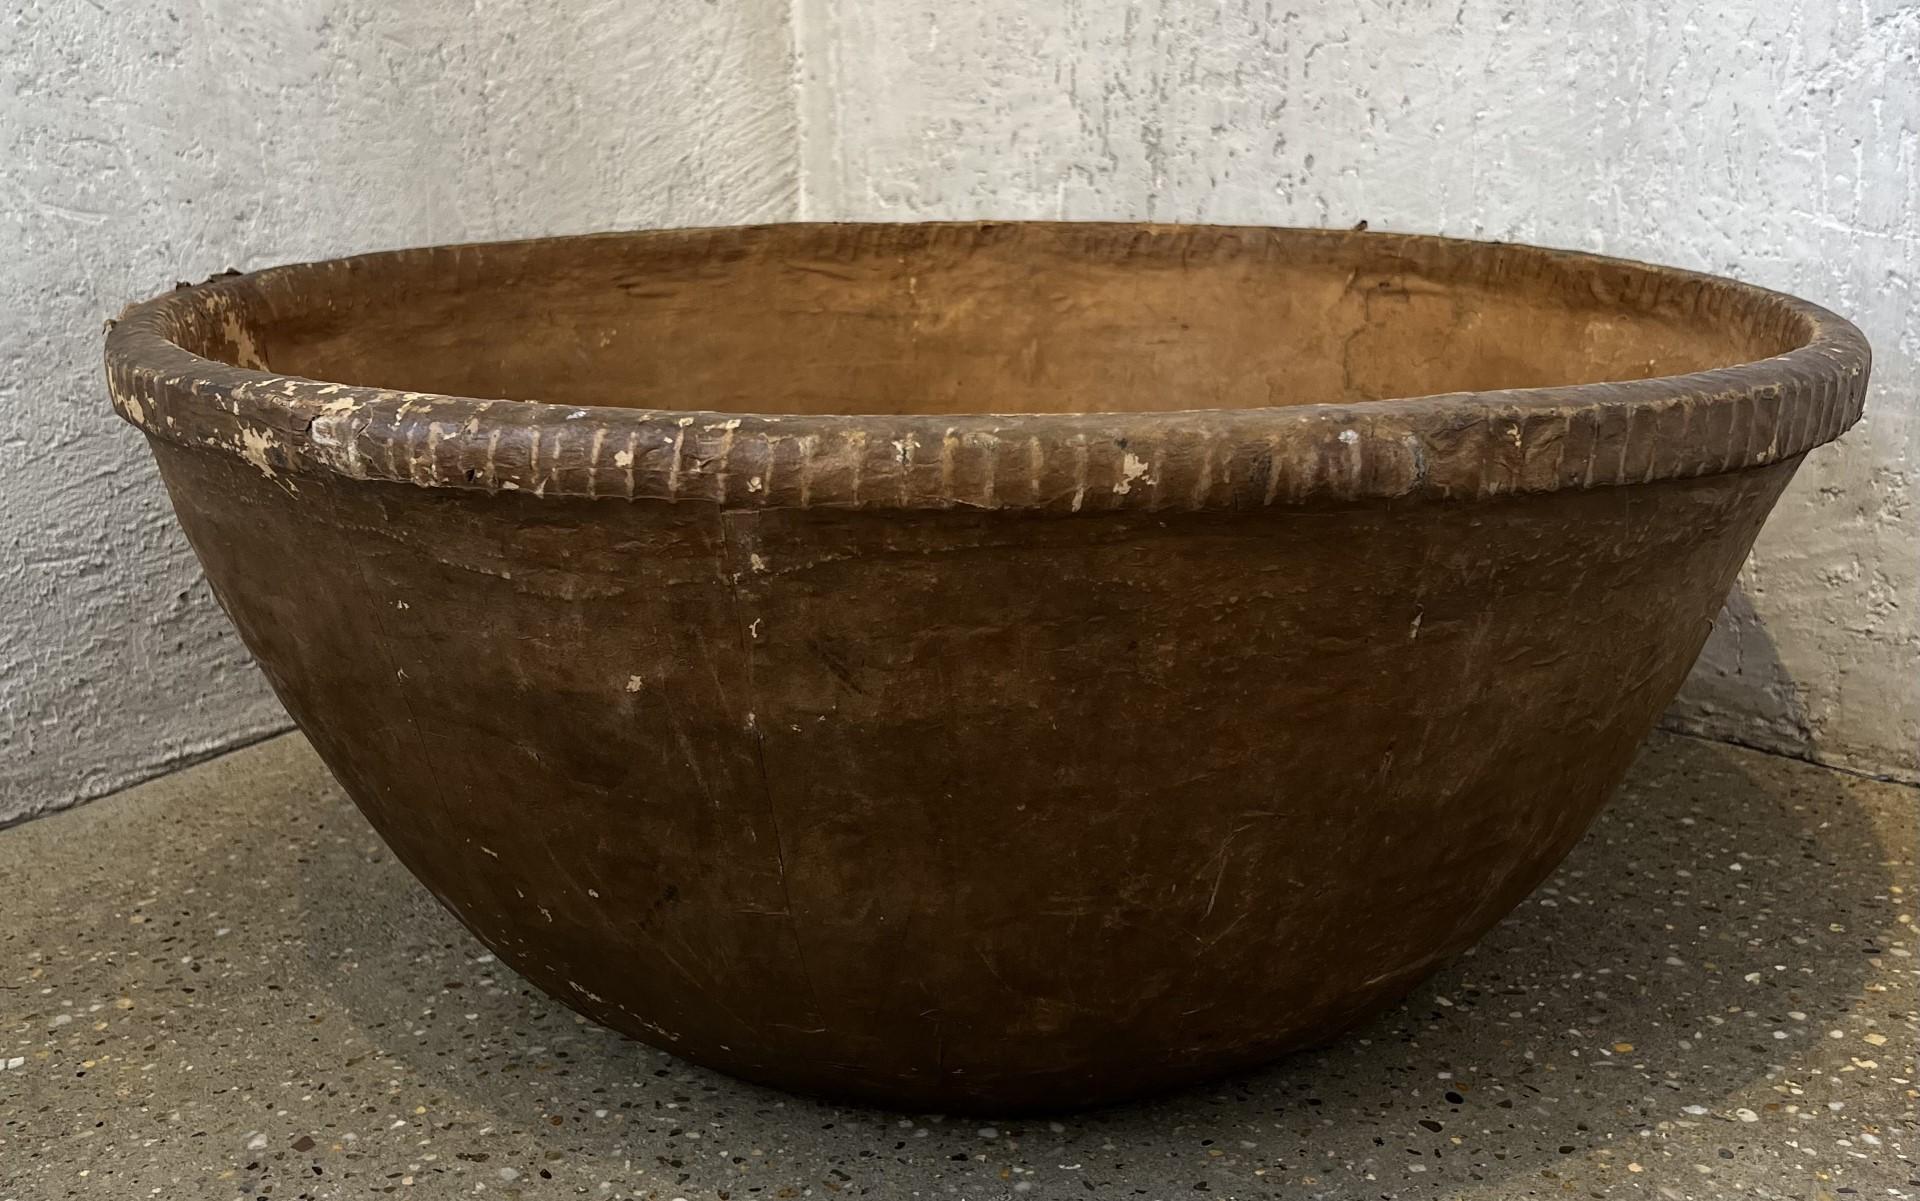 The scale of this papermache bowl is unusual and spectacular. The color, stitching, and scale make this an object d’ art. 
Three pieces available.